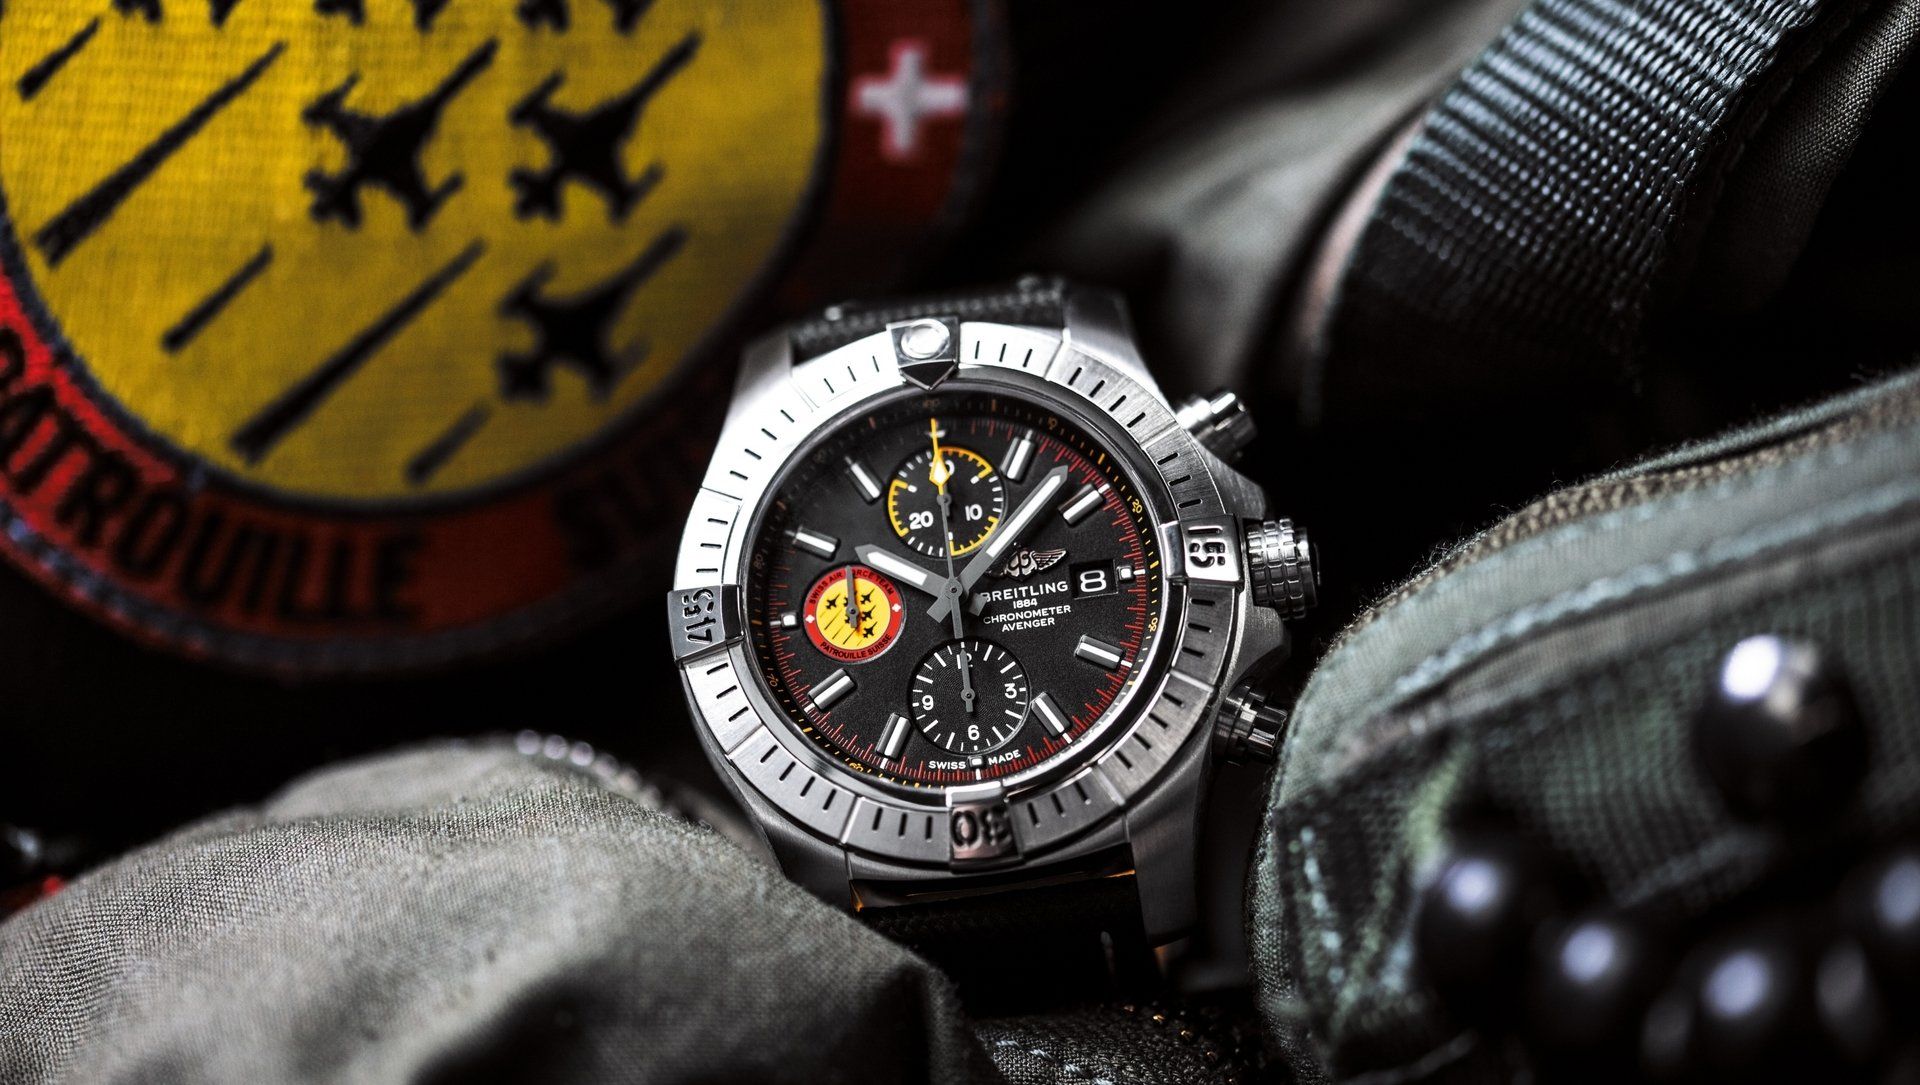 The Breitling Avenger collection takes to the skies in spectacular fashion